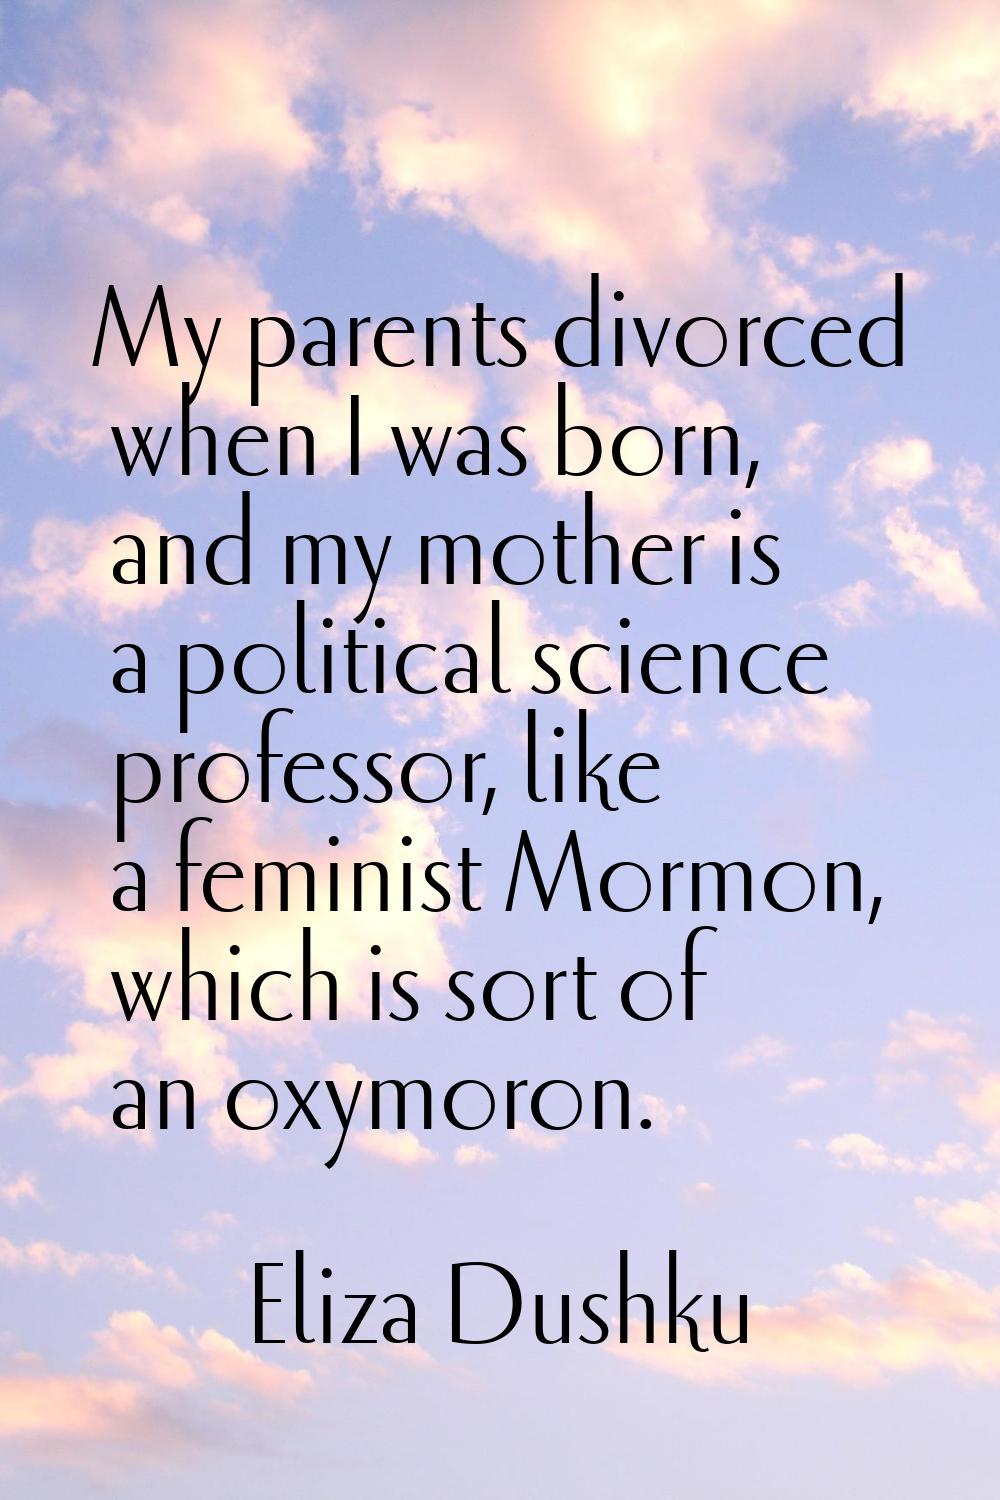 My parents divorced when I was born, and my mother is a political science professor, like a feminis